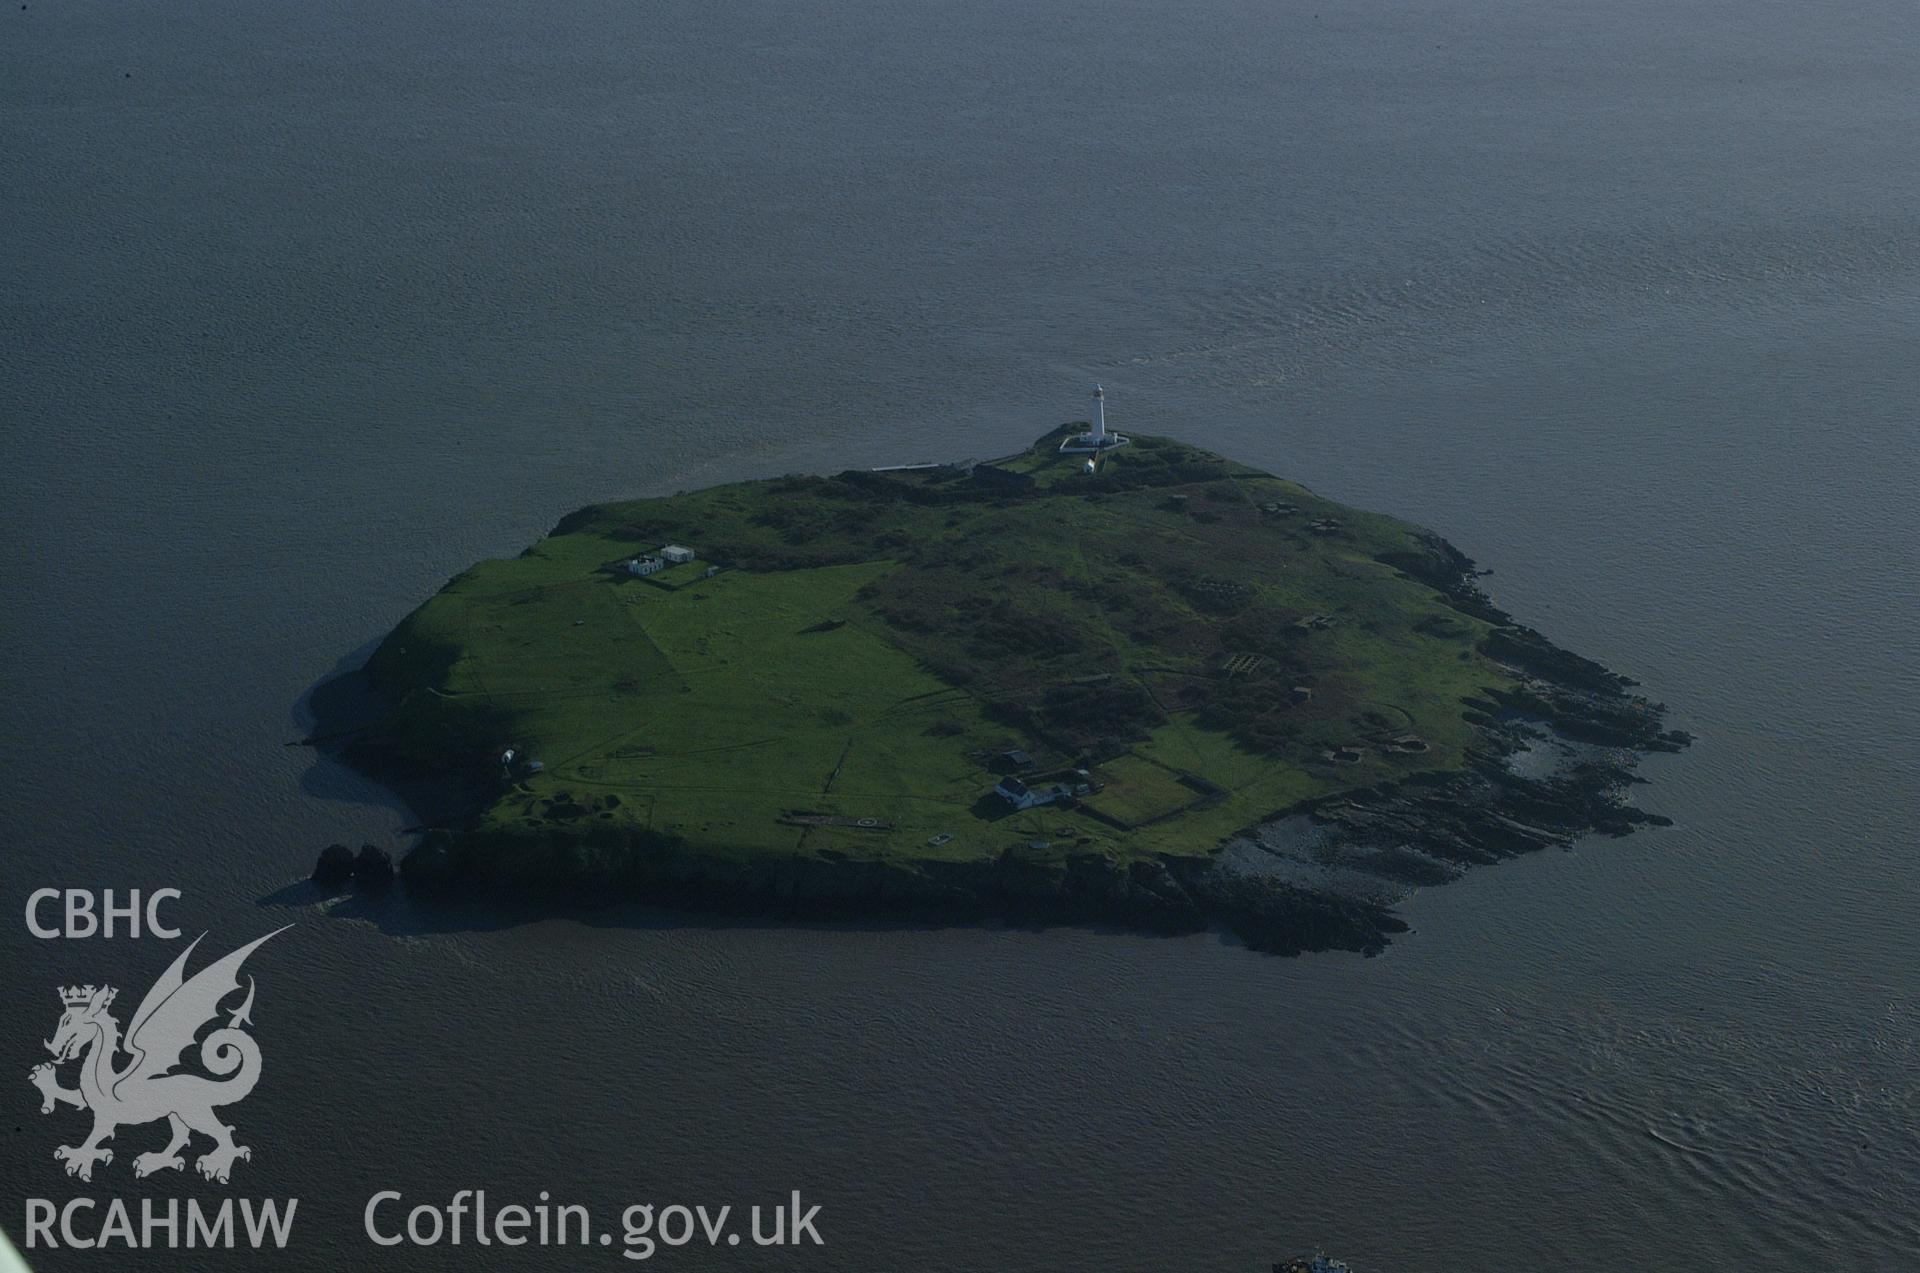 RCAHMW colour oblique aerial photograph of Flat Holm Island taken on 13/01/2005 by Toby Driver